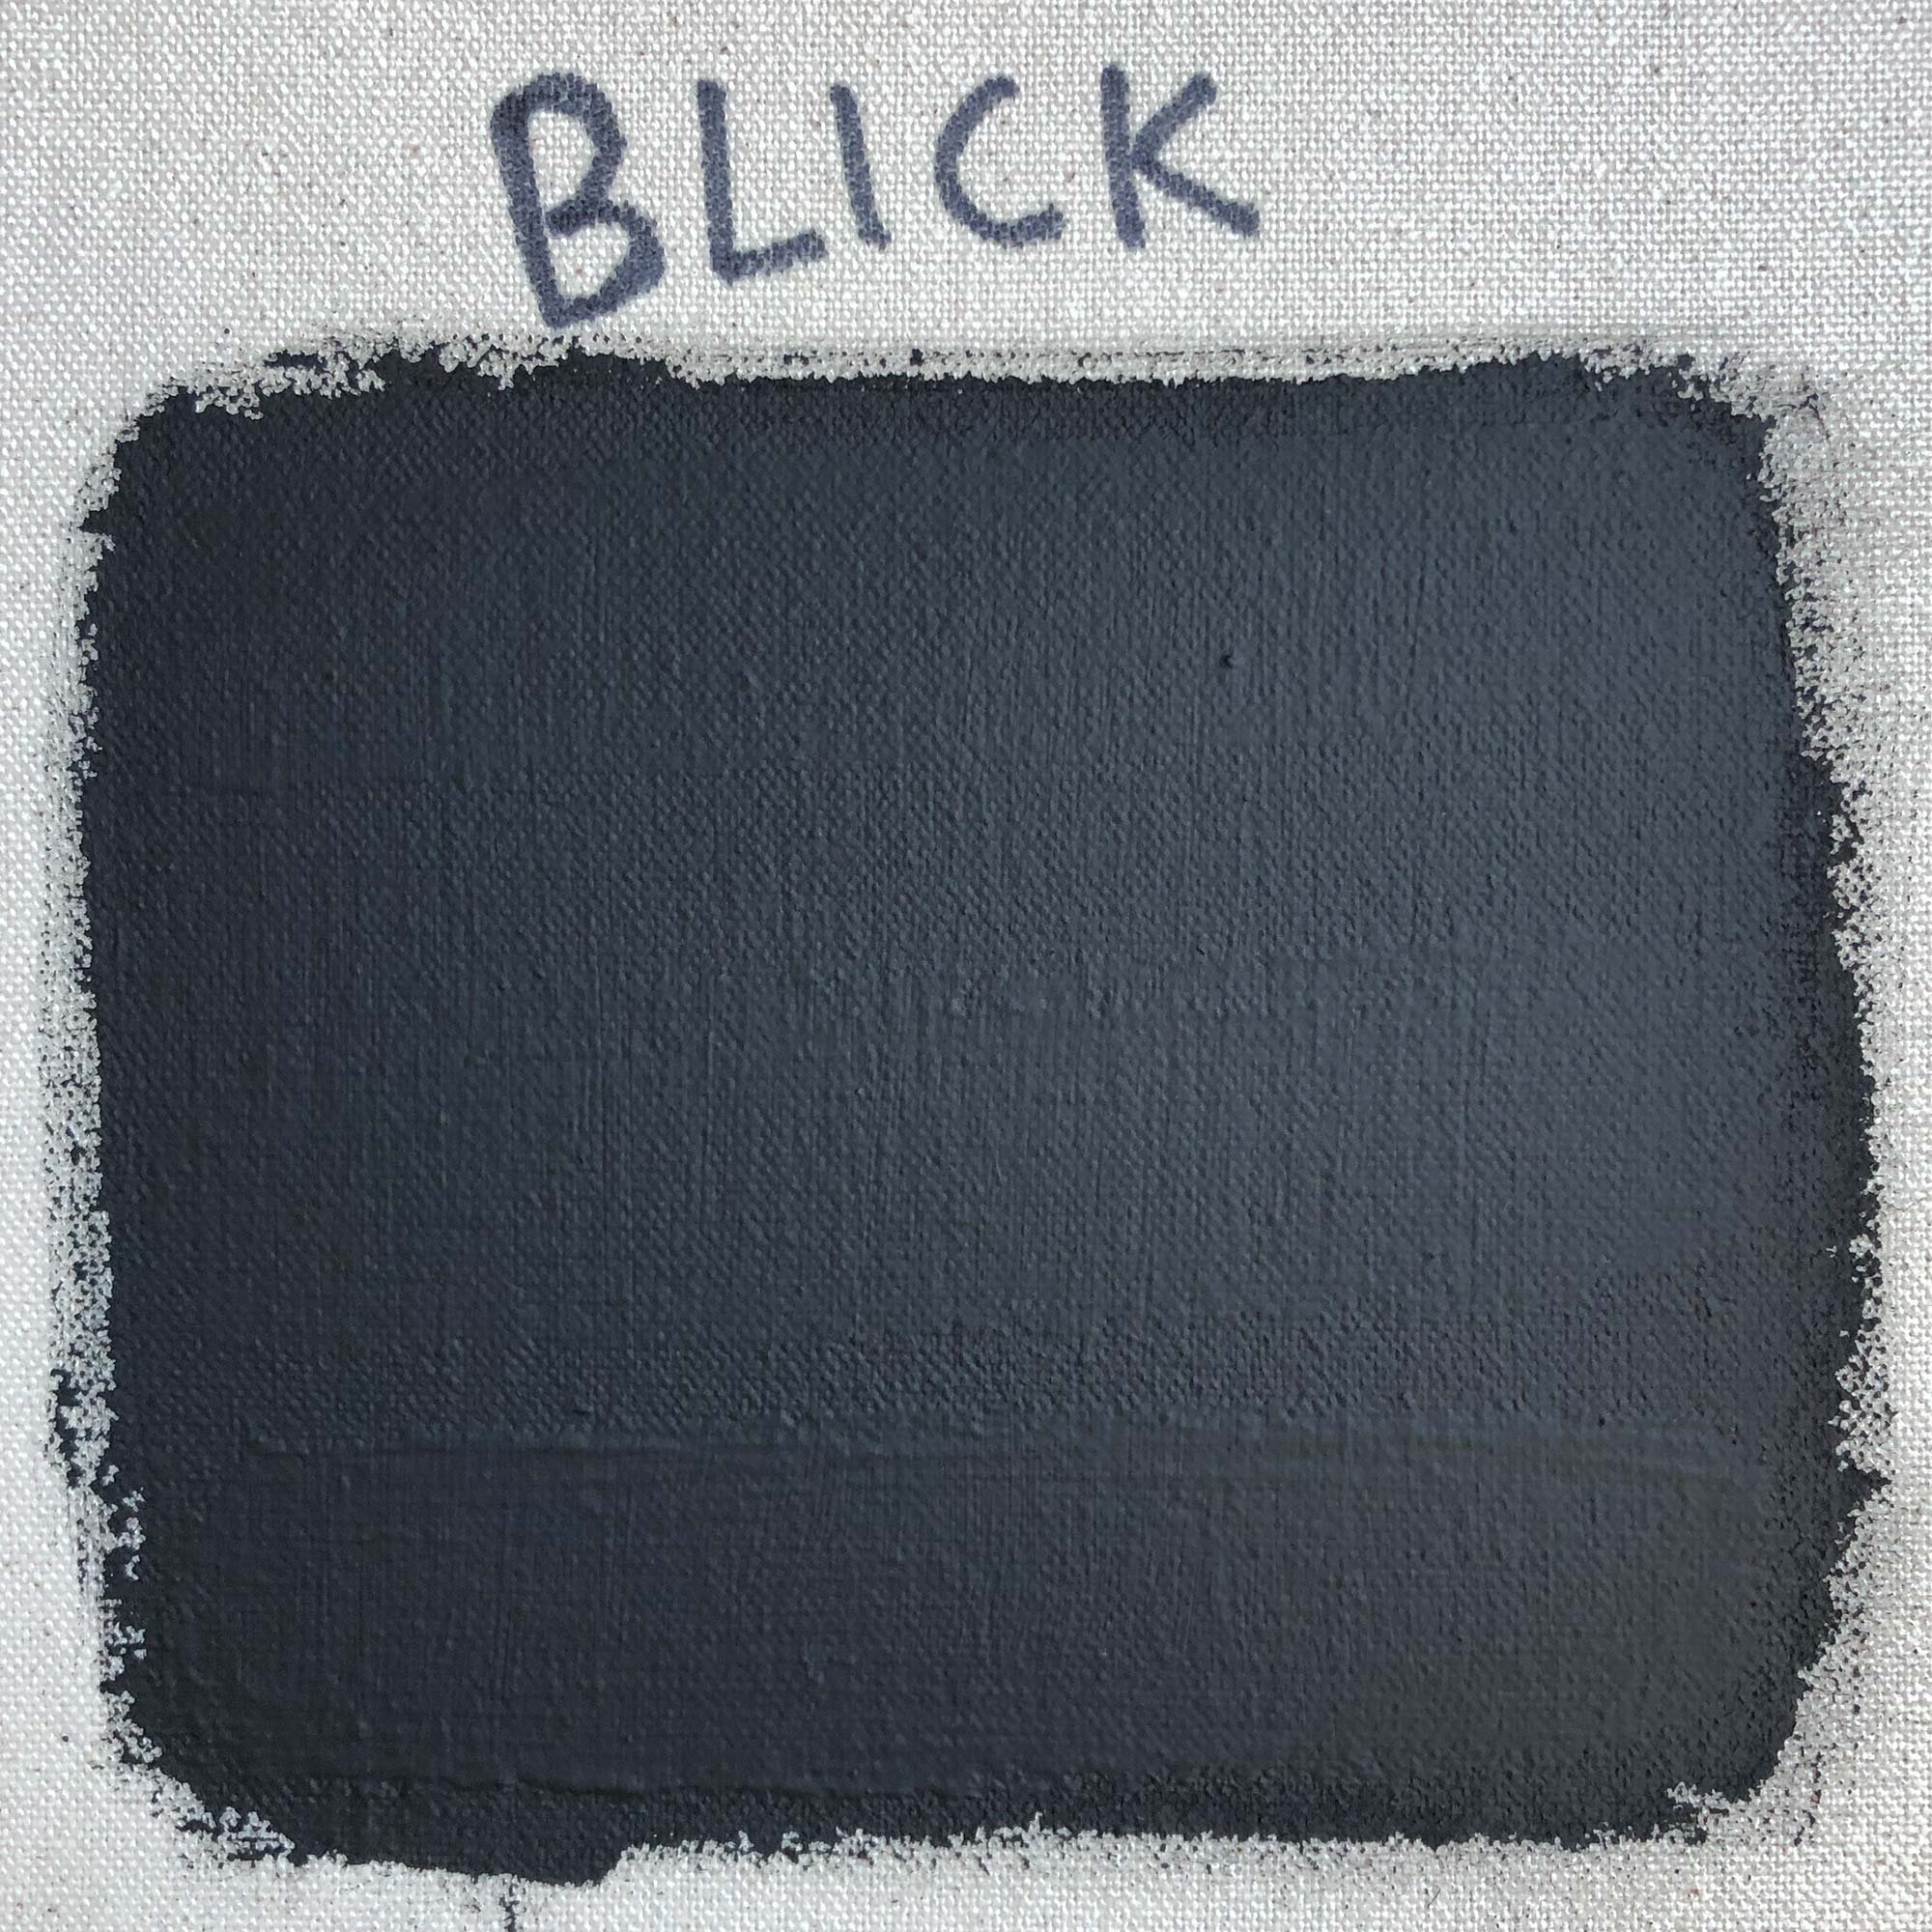 The Best Black Acrylic Gesso for Preparing Canvas — The Studio Manager